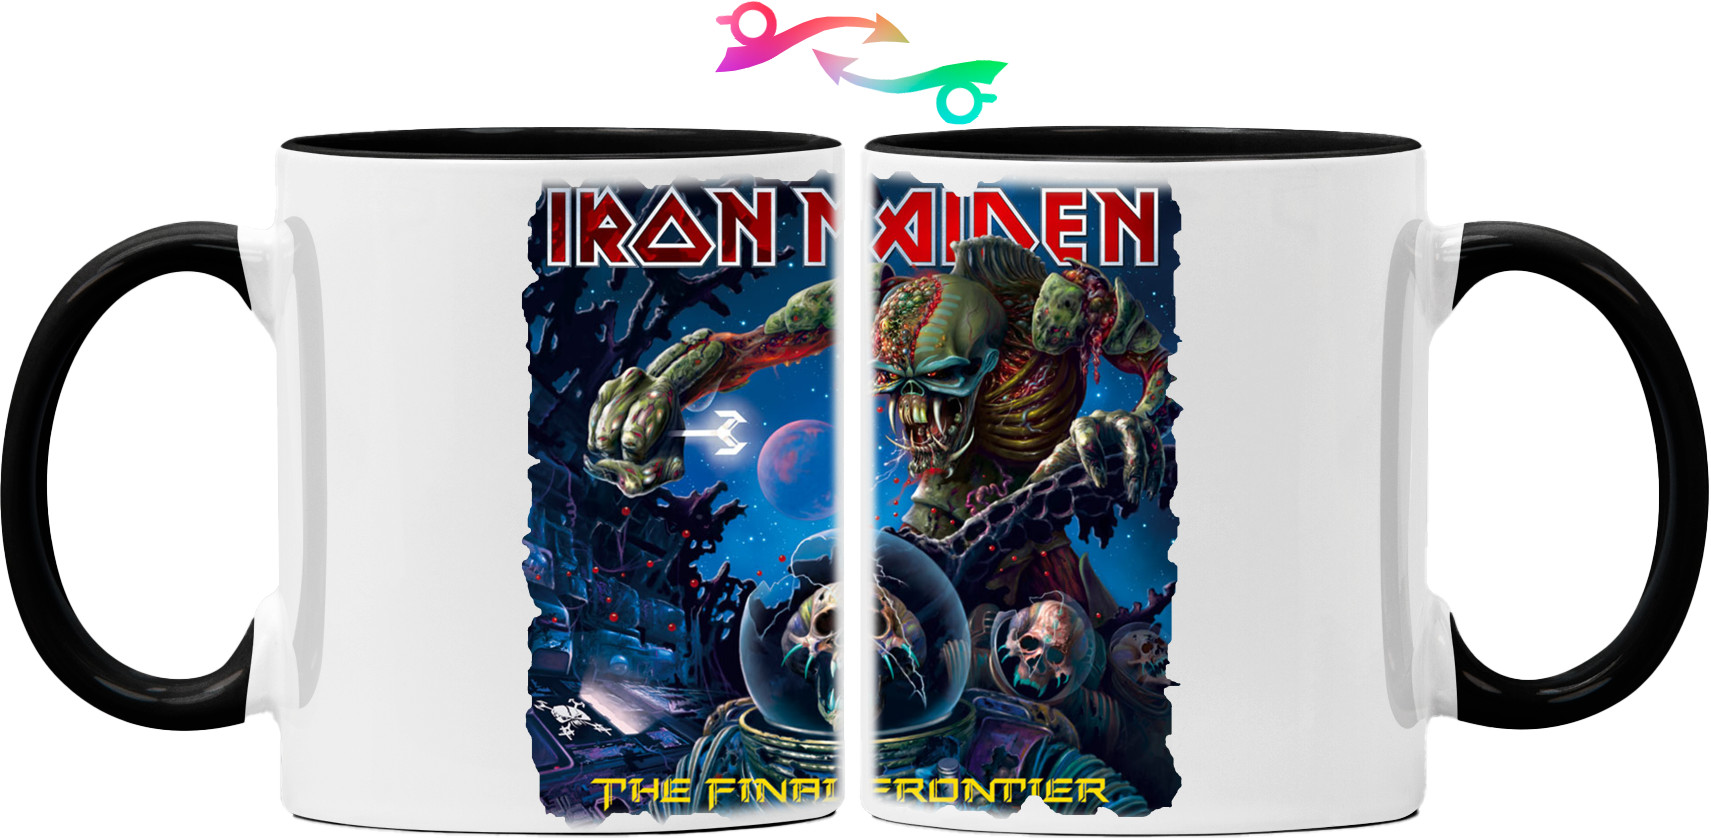 iron maiden the final frontier